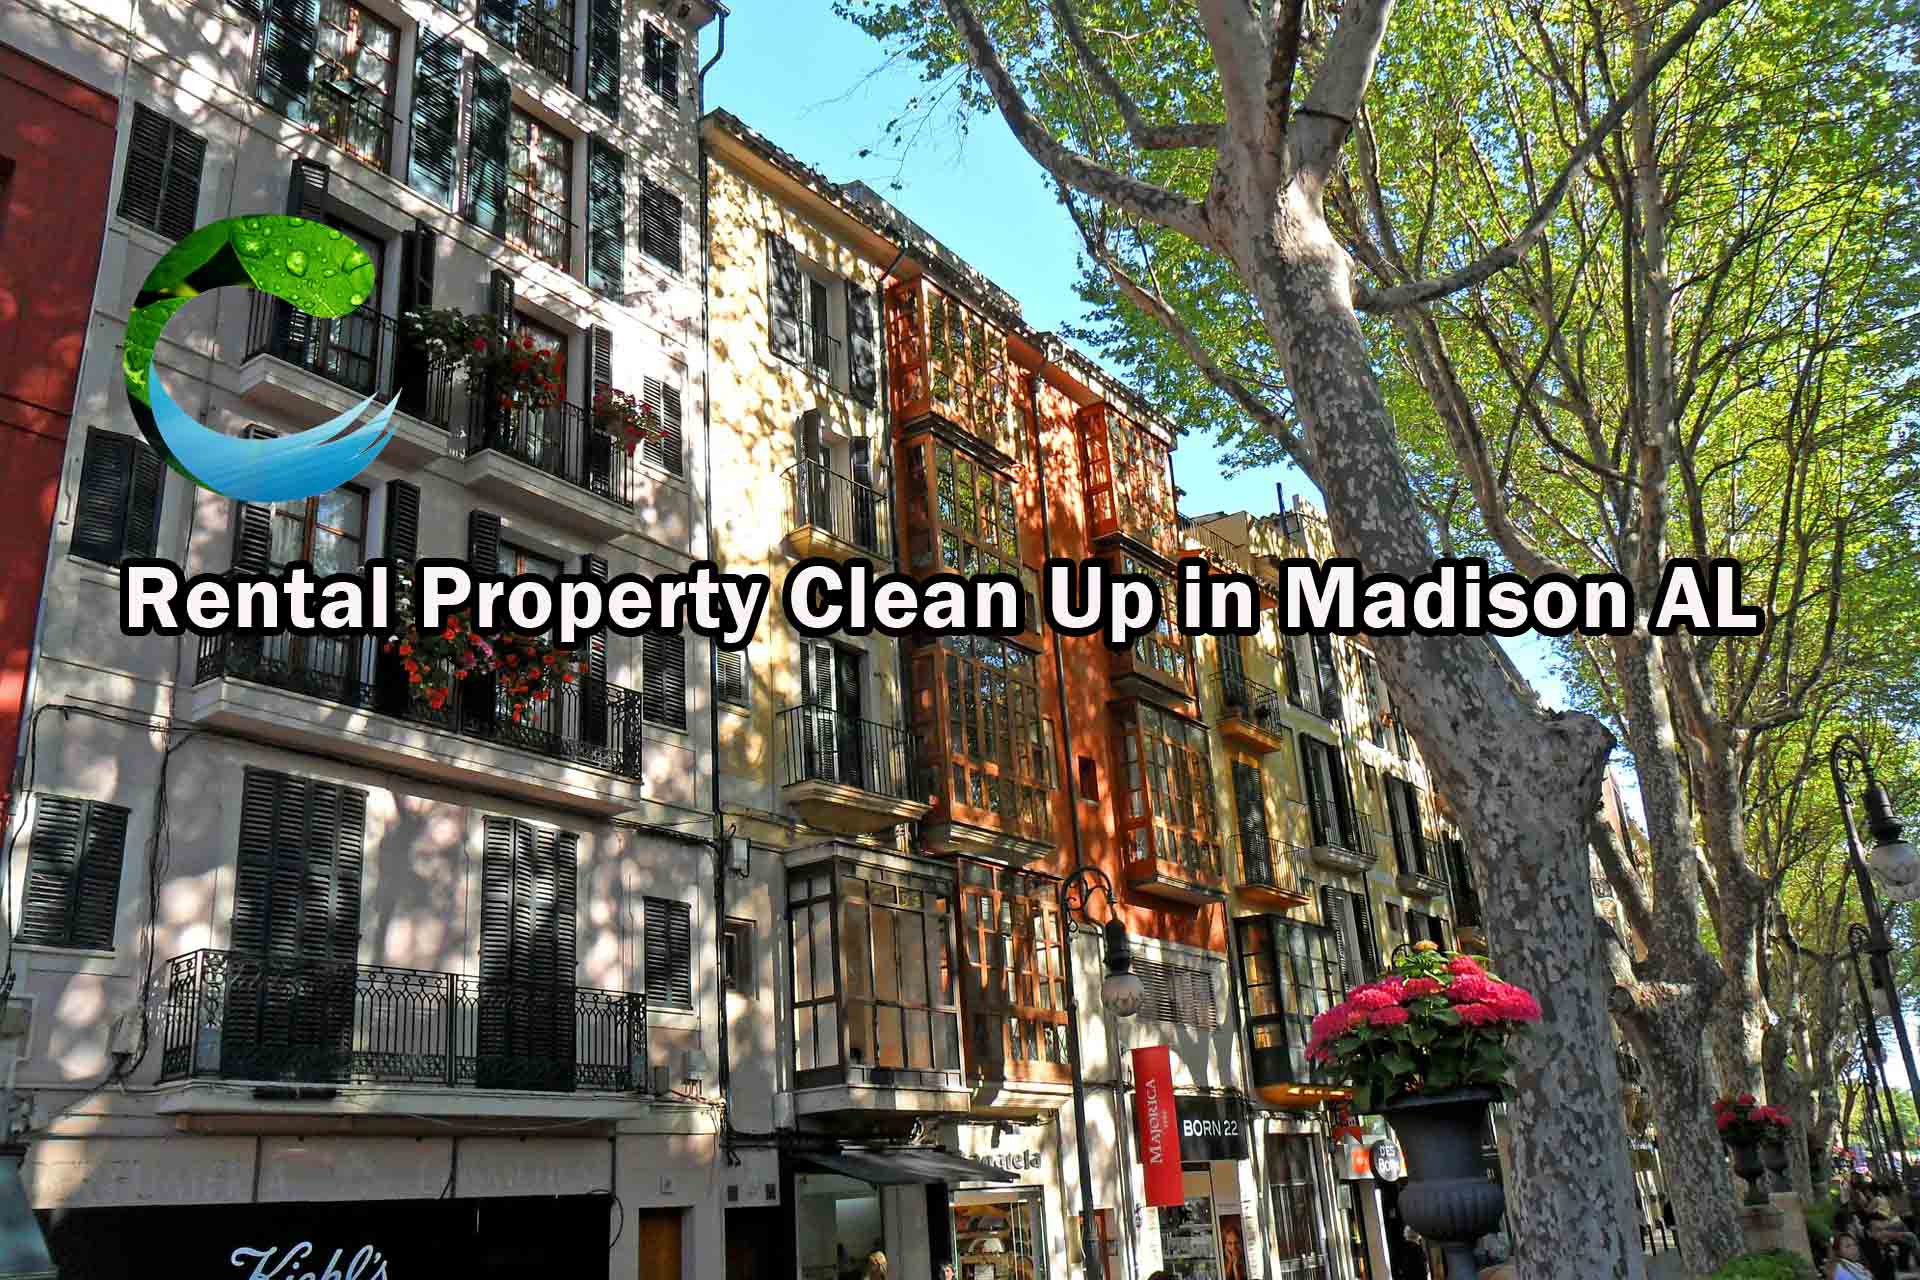 Rental Property Clean Up in Madison Al